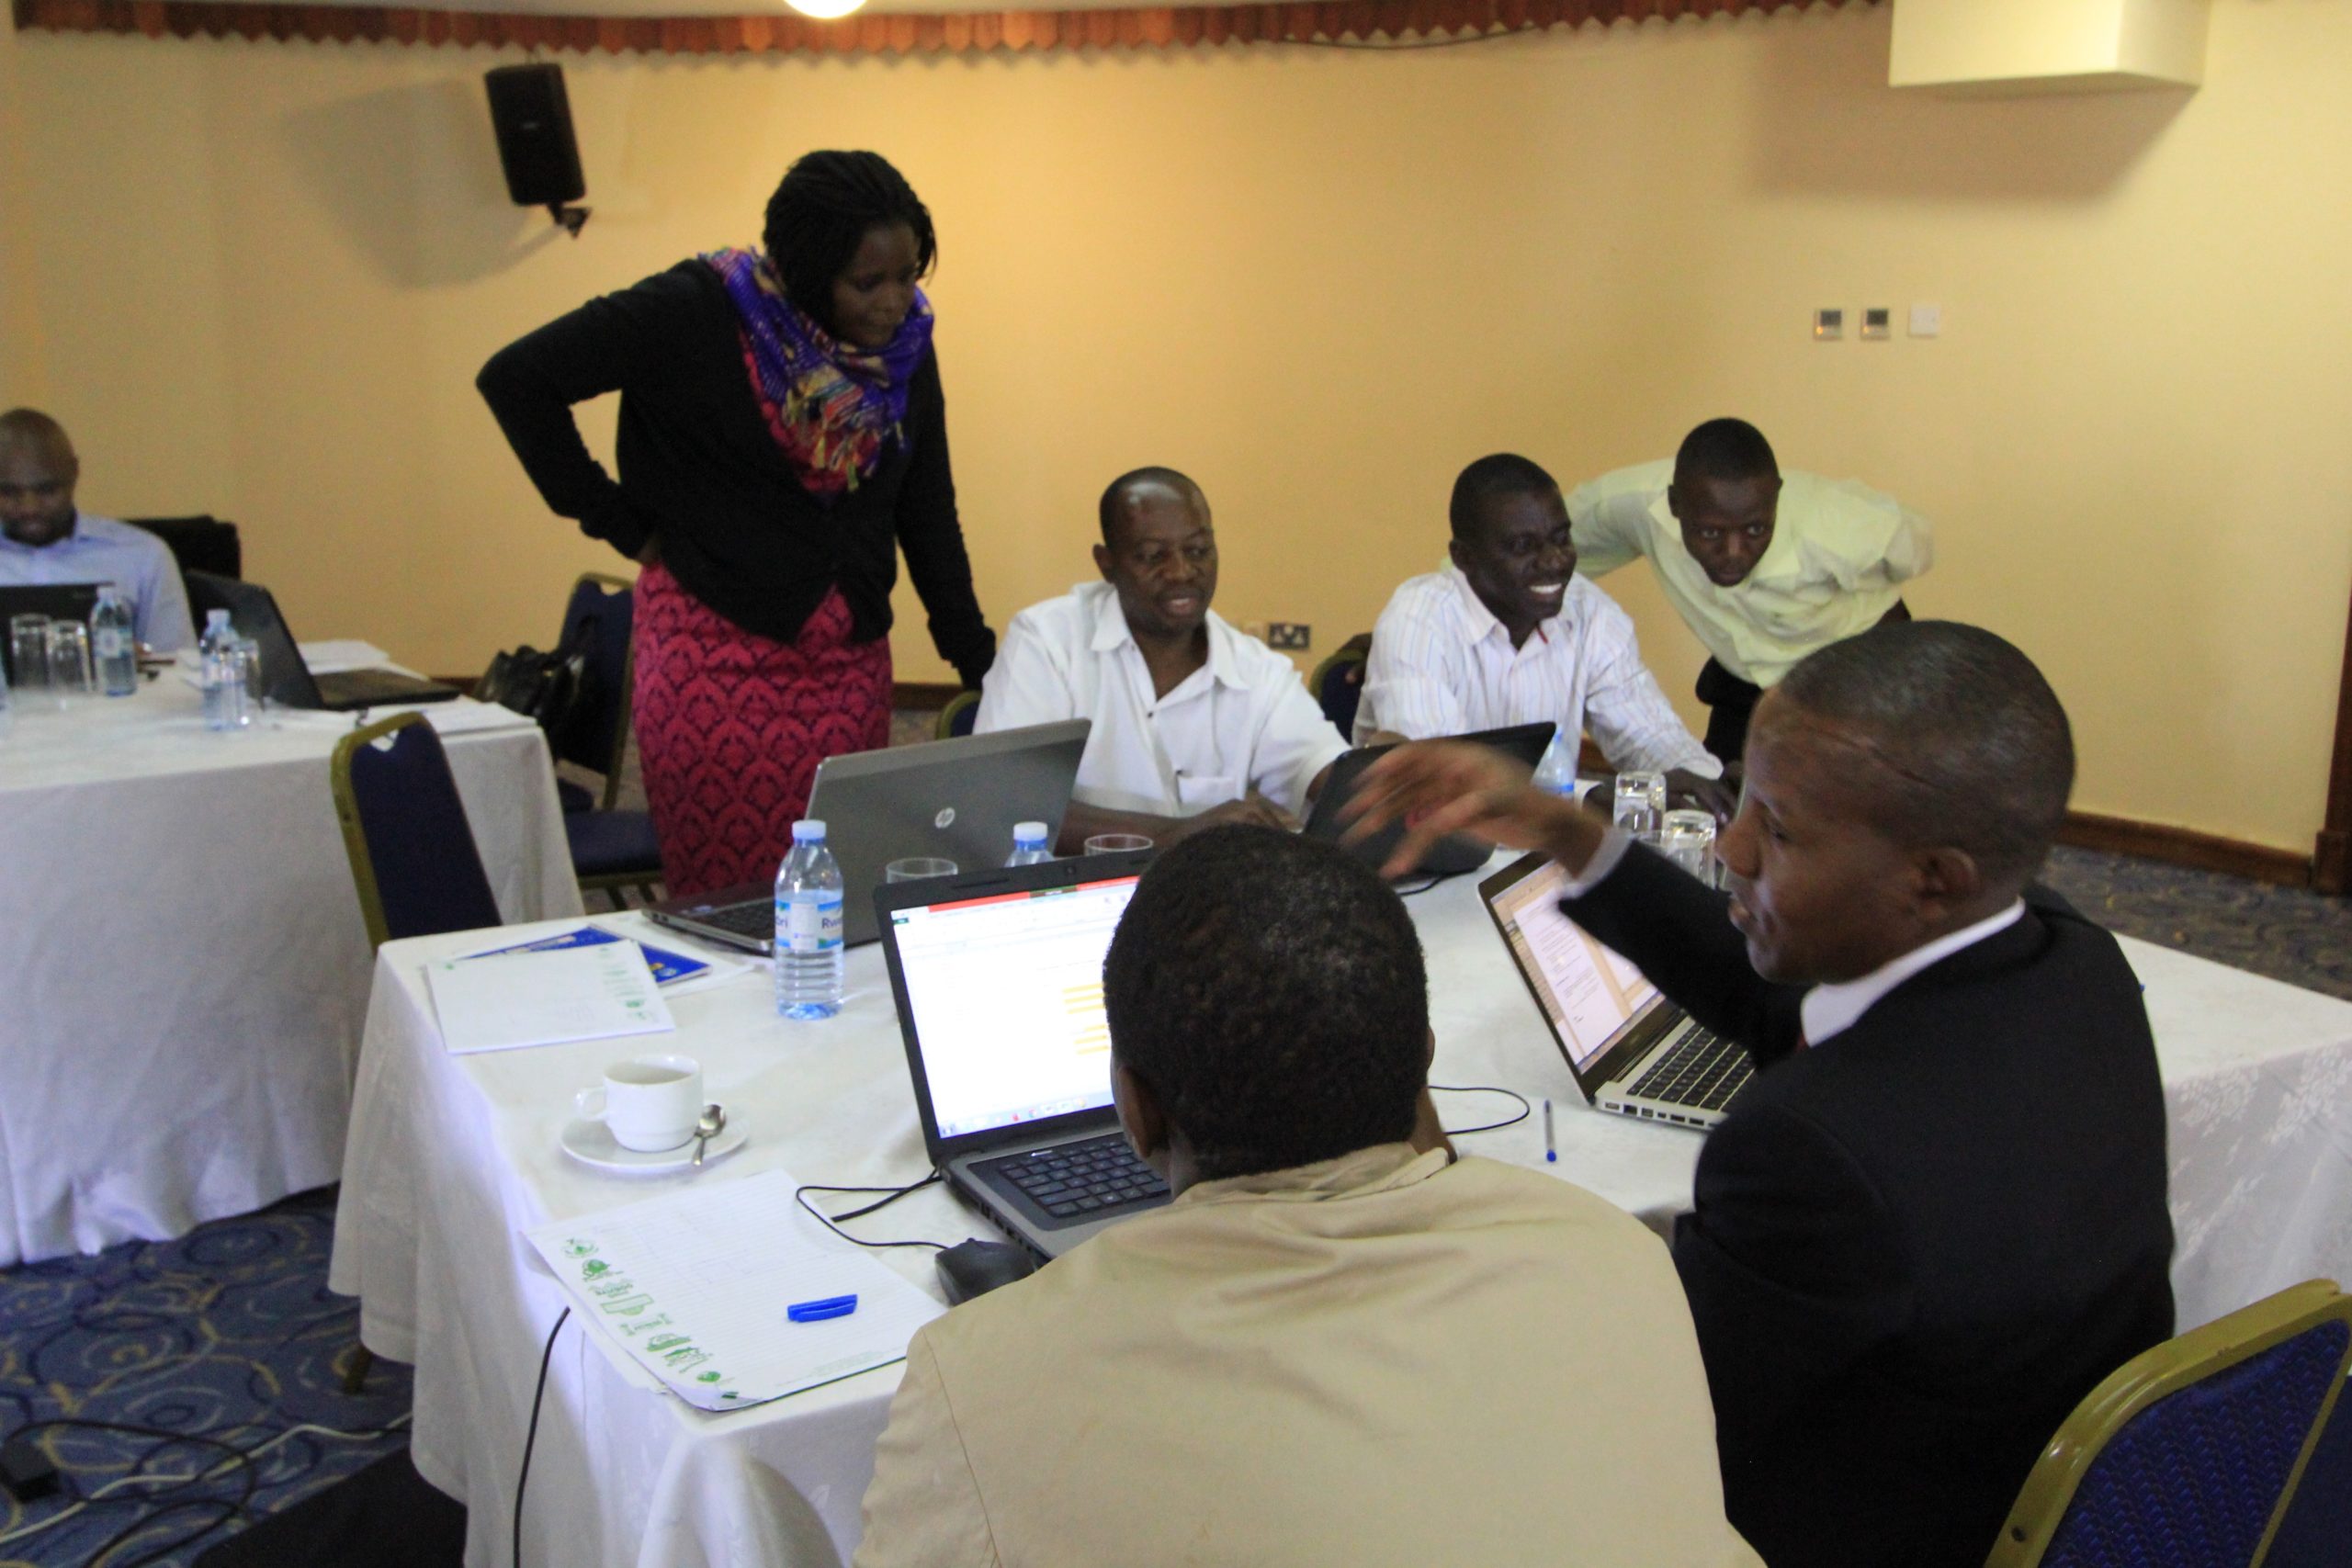 A photo of seven data analysts in Kampala working together on their laptops at a conference room table